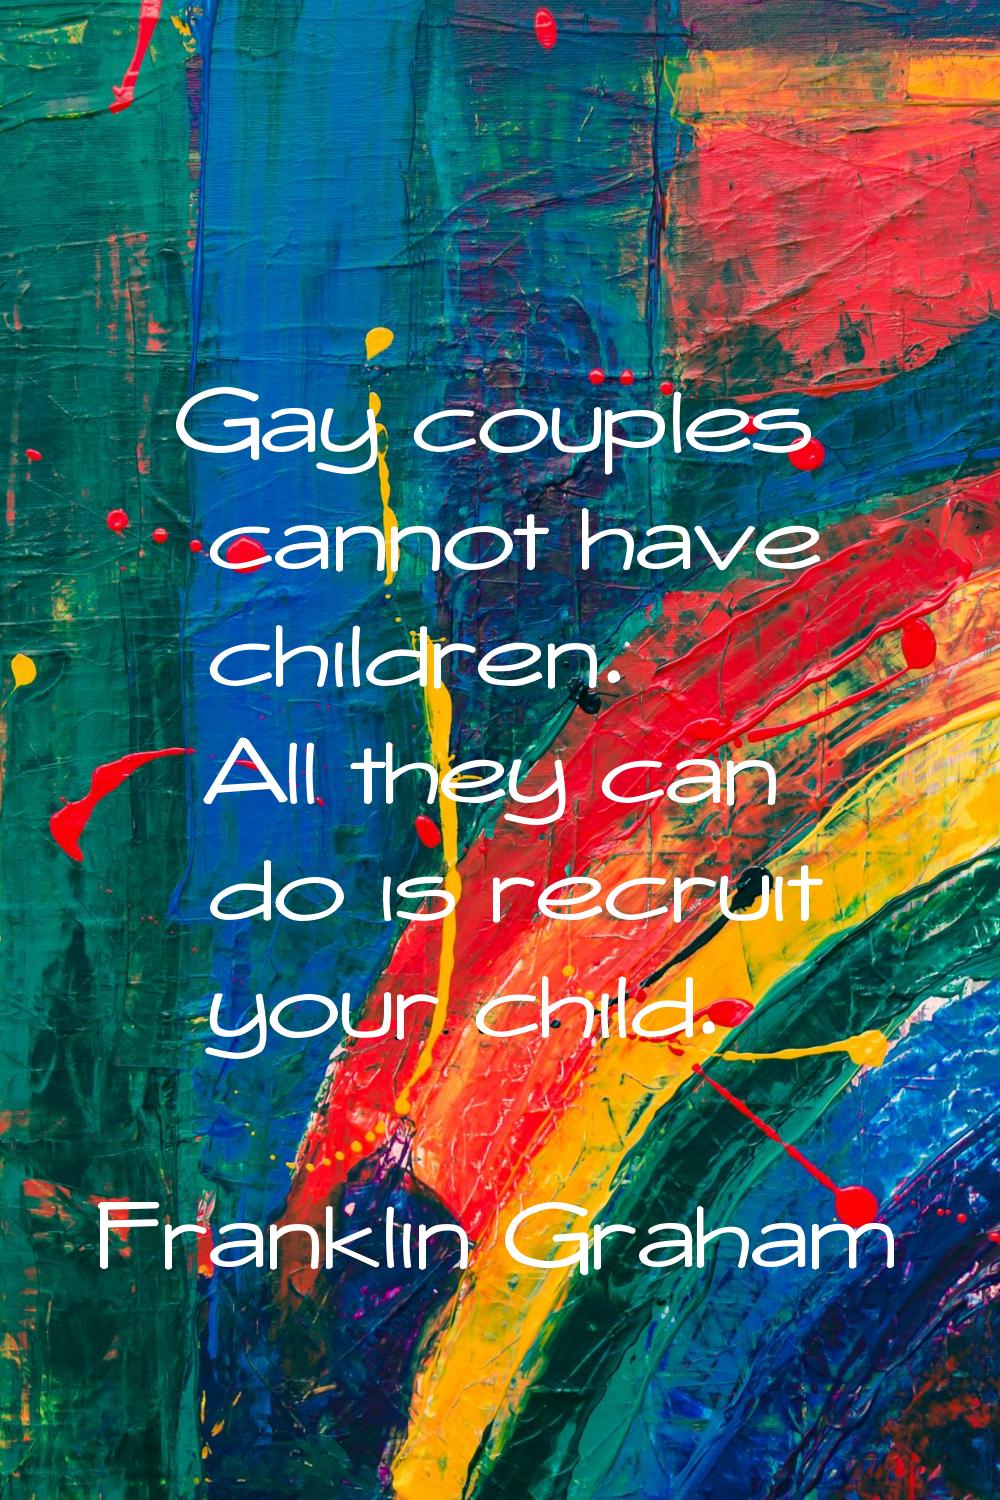 Gay couples cannot have children. All they can do is recruit your child.